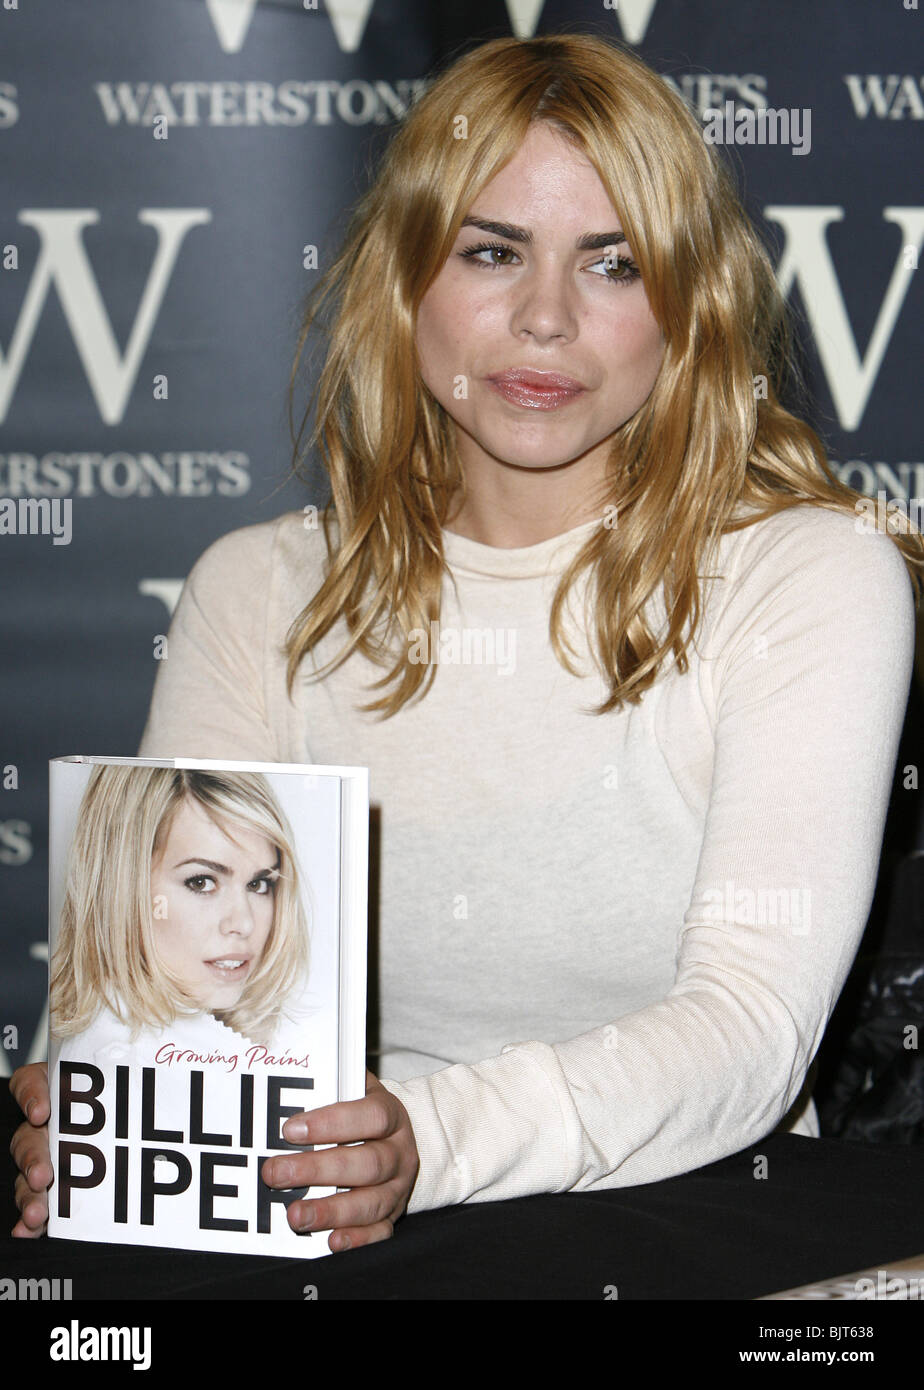 BILLIE PIPER BILLIE PIPER BOOK SIGNING GROWING PAINS WATERSTONES OXFORD STREET LONDON 23 October 2006 Stock Photo